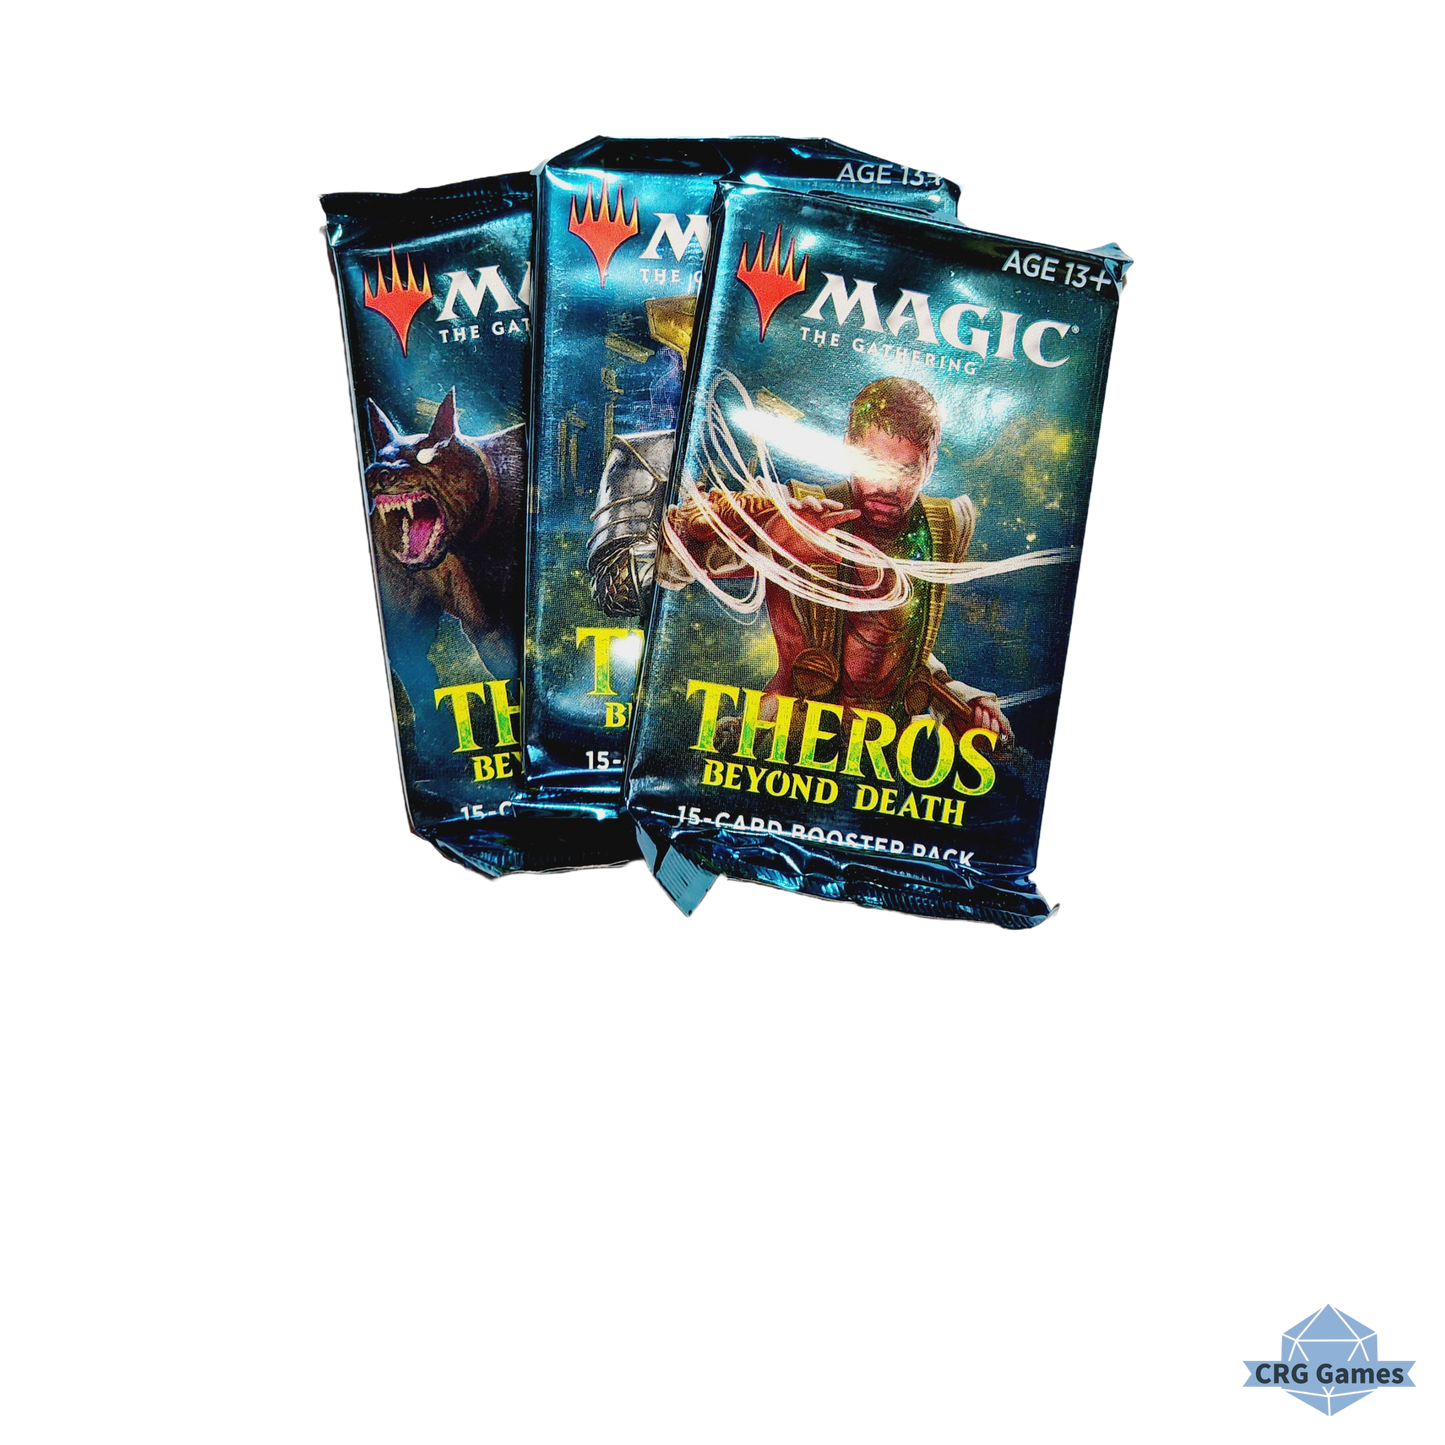 Theros Beyond Death - Booster Pack - THB